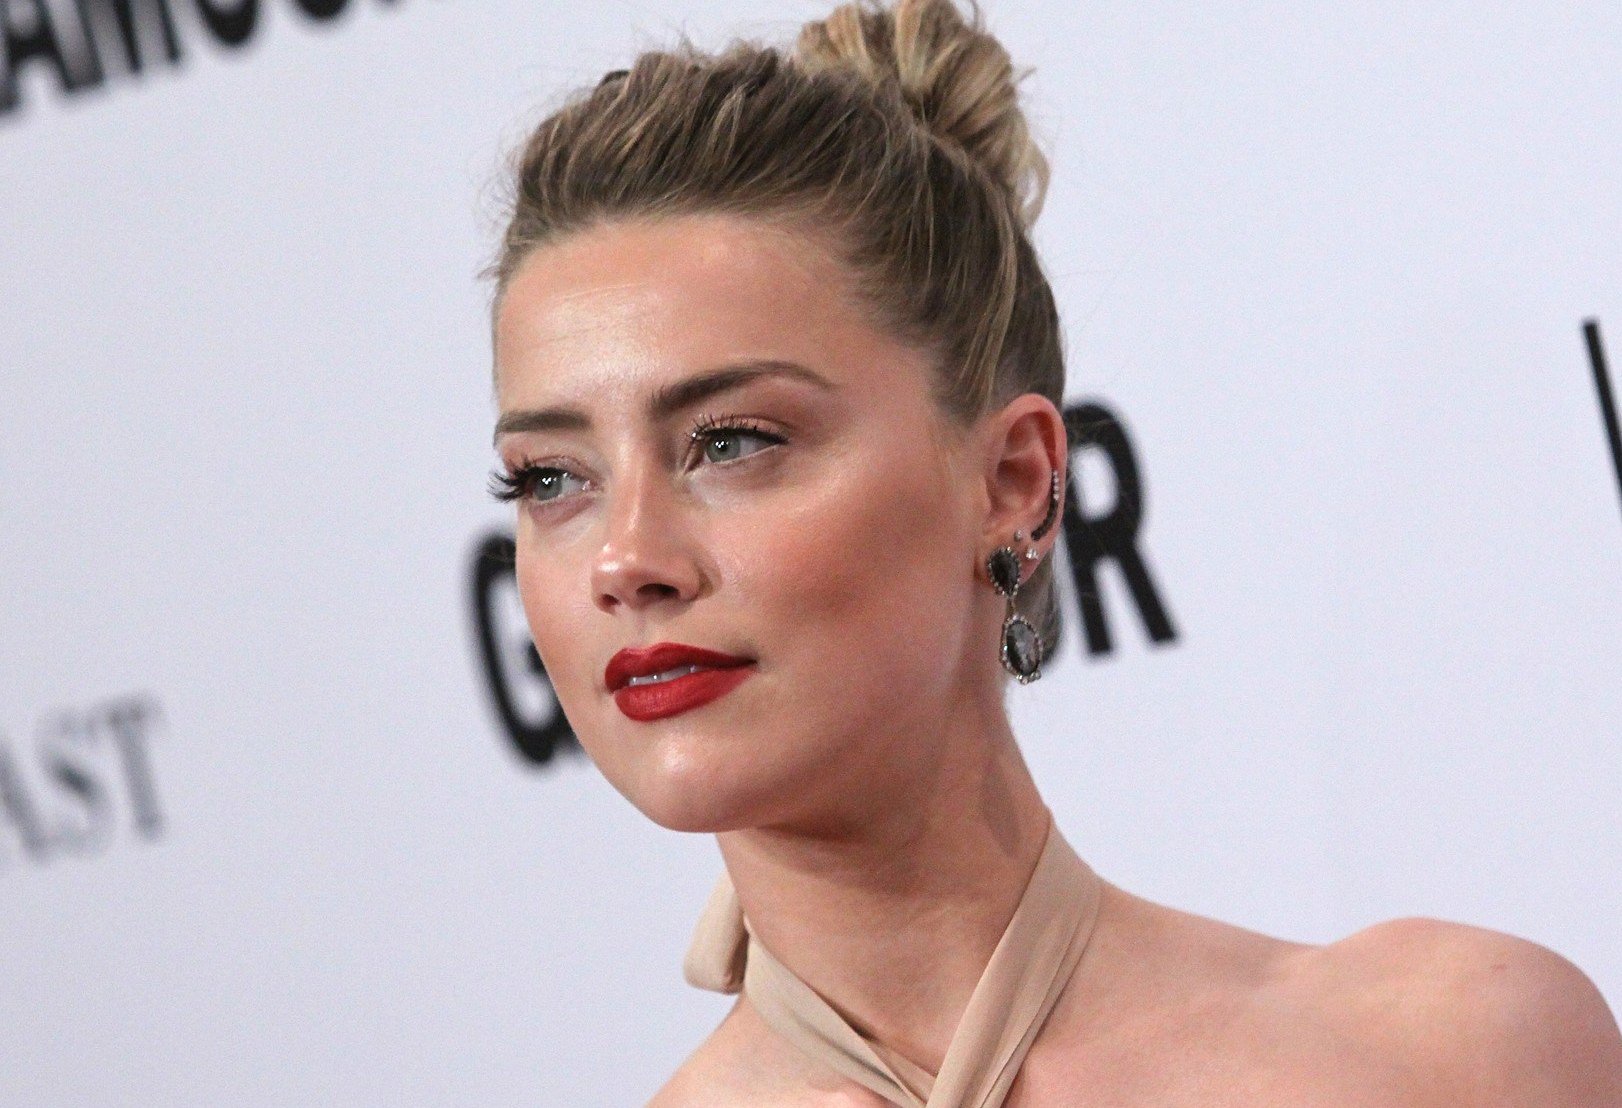 Amber Heard at The 2016 Glamour Women Of The Year Awards held at NeueHouse Hollywood on November 14, 2016 in Los Angeles, California, United States, Image: 305621885, License: Rights-managed, Restrictions: *** World Rights ***, Model Release: no, Credit line: Profimedia, SIPA USA